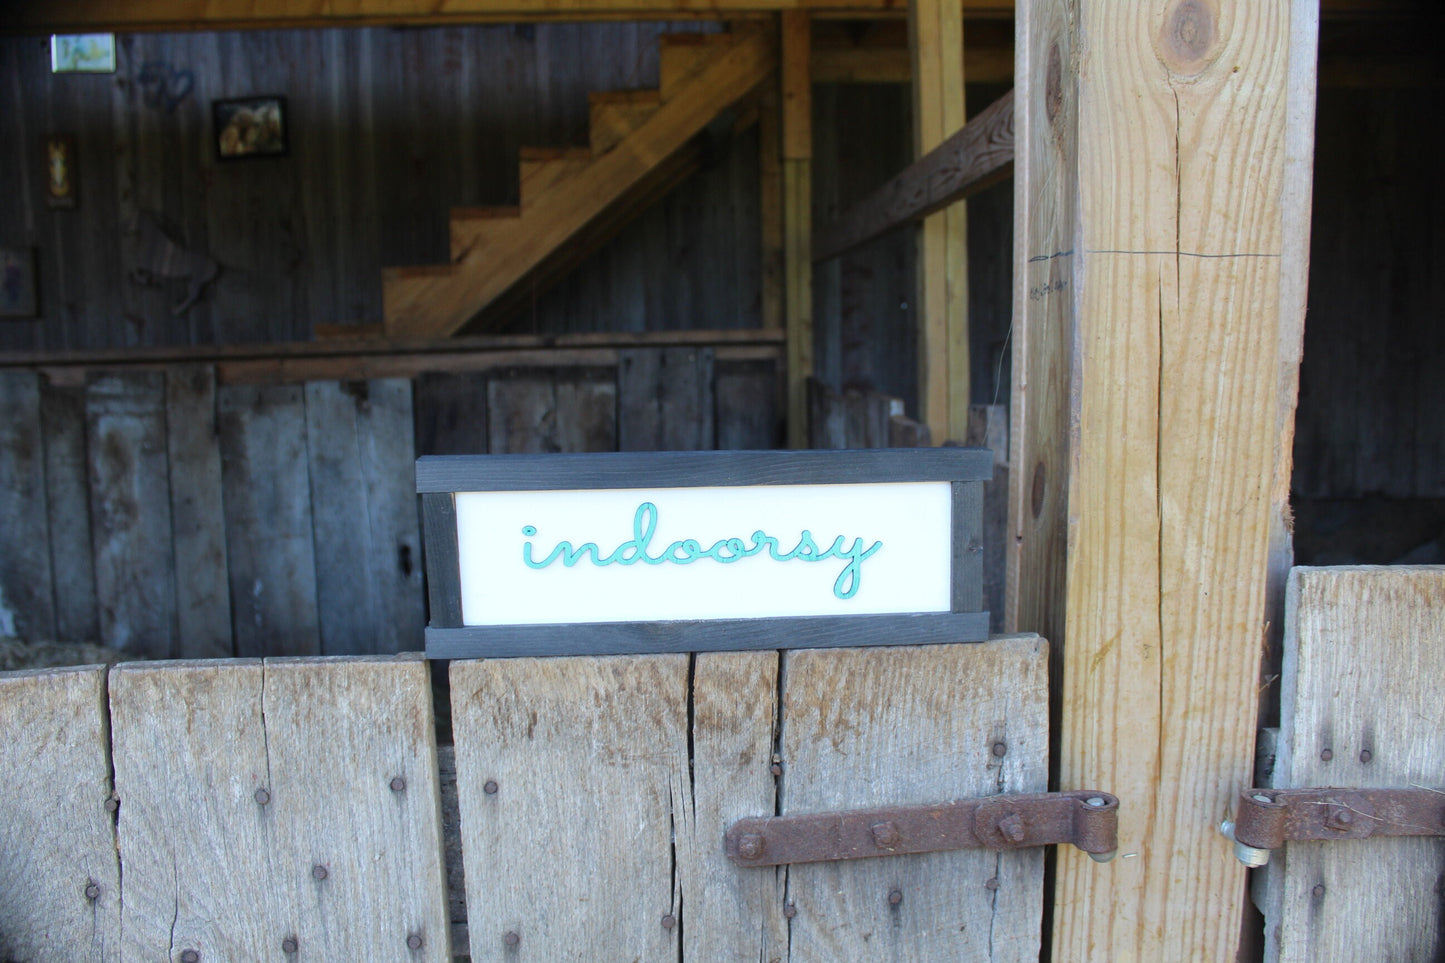 Indoorsy I Love Inside Hate Outdoors Wood Sign Raised Text Wall Hanging Decoration Hates Camping Primitive Rustic  In Doors Gift Decor